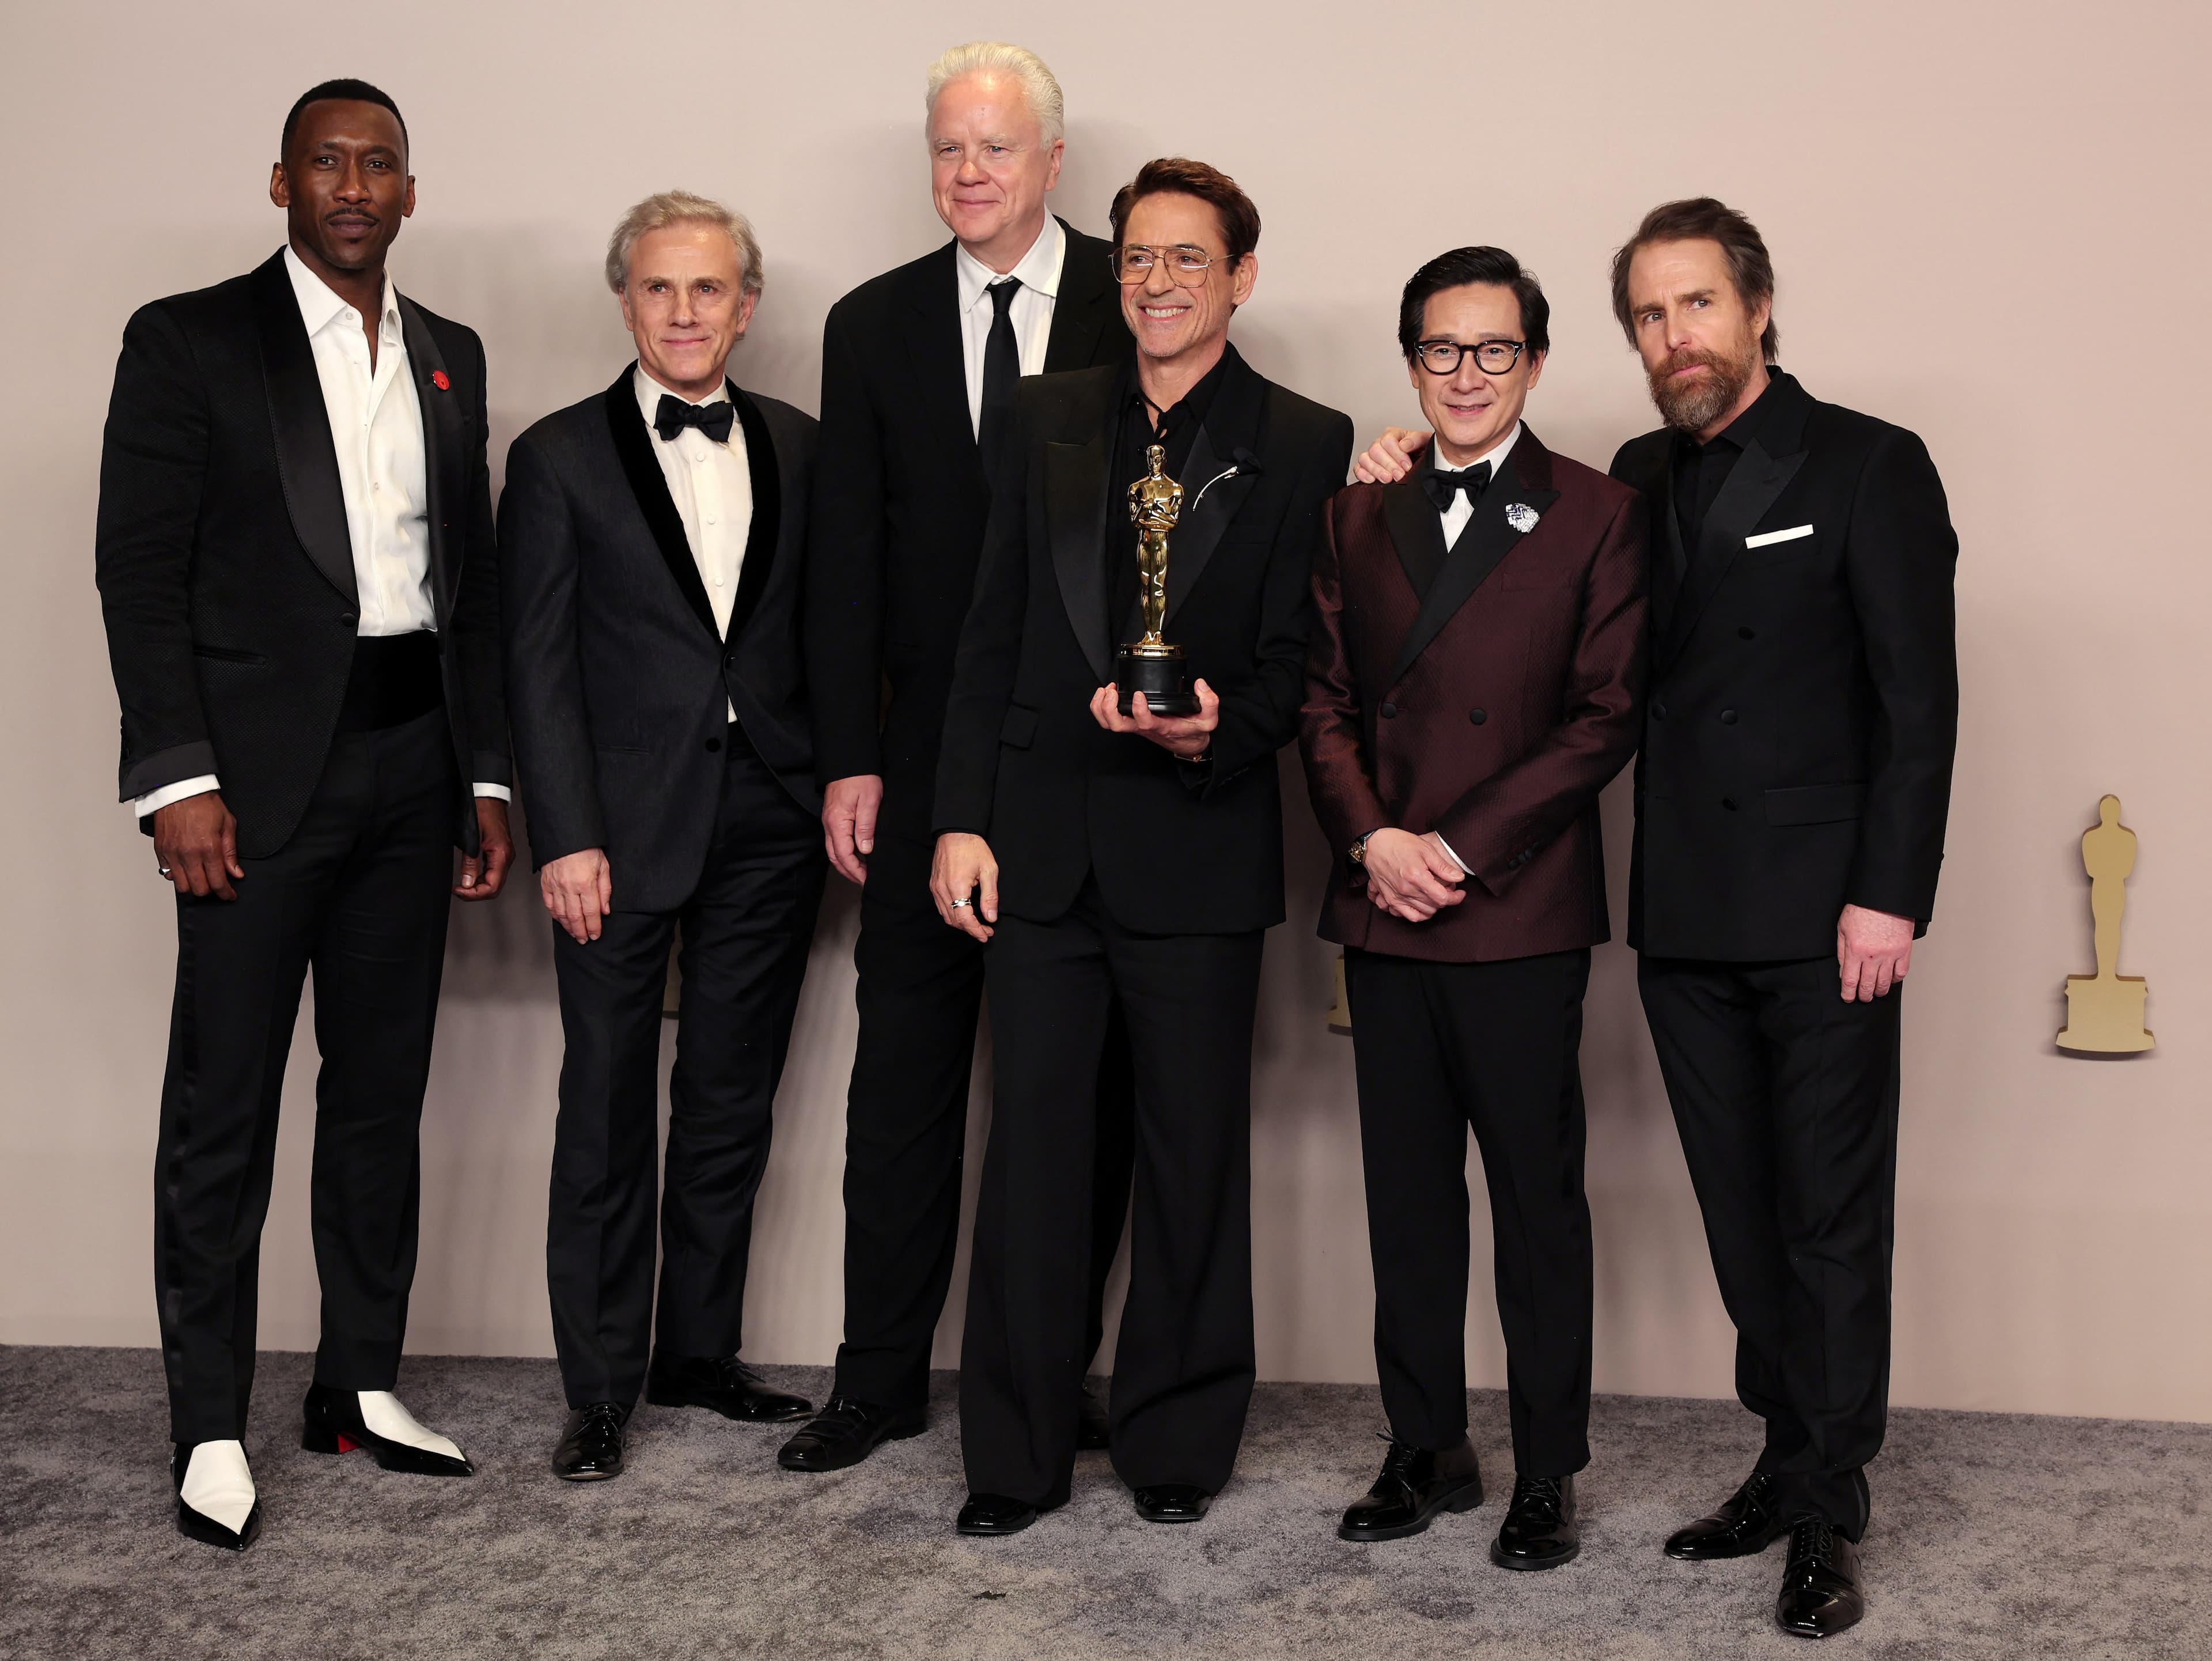 Robert Downey Jr. poses with the Best Supporting Actor Oscar for "Oppenheimer", along with Ke Huy Quan, Sam Rockwell, Mahershala Ali, Christoph Waltz and Tim Robbins, in the Oscars photo room at the 96th Academy Awards in Hollywood, Los Angeles, California, U.S., March 10, 2024. (REUTERS)